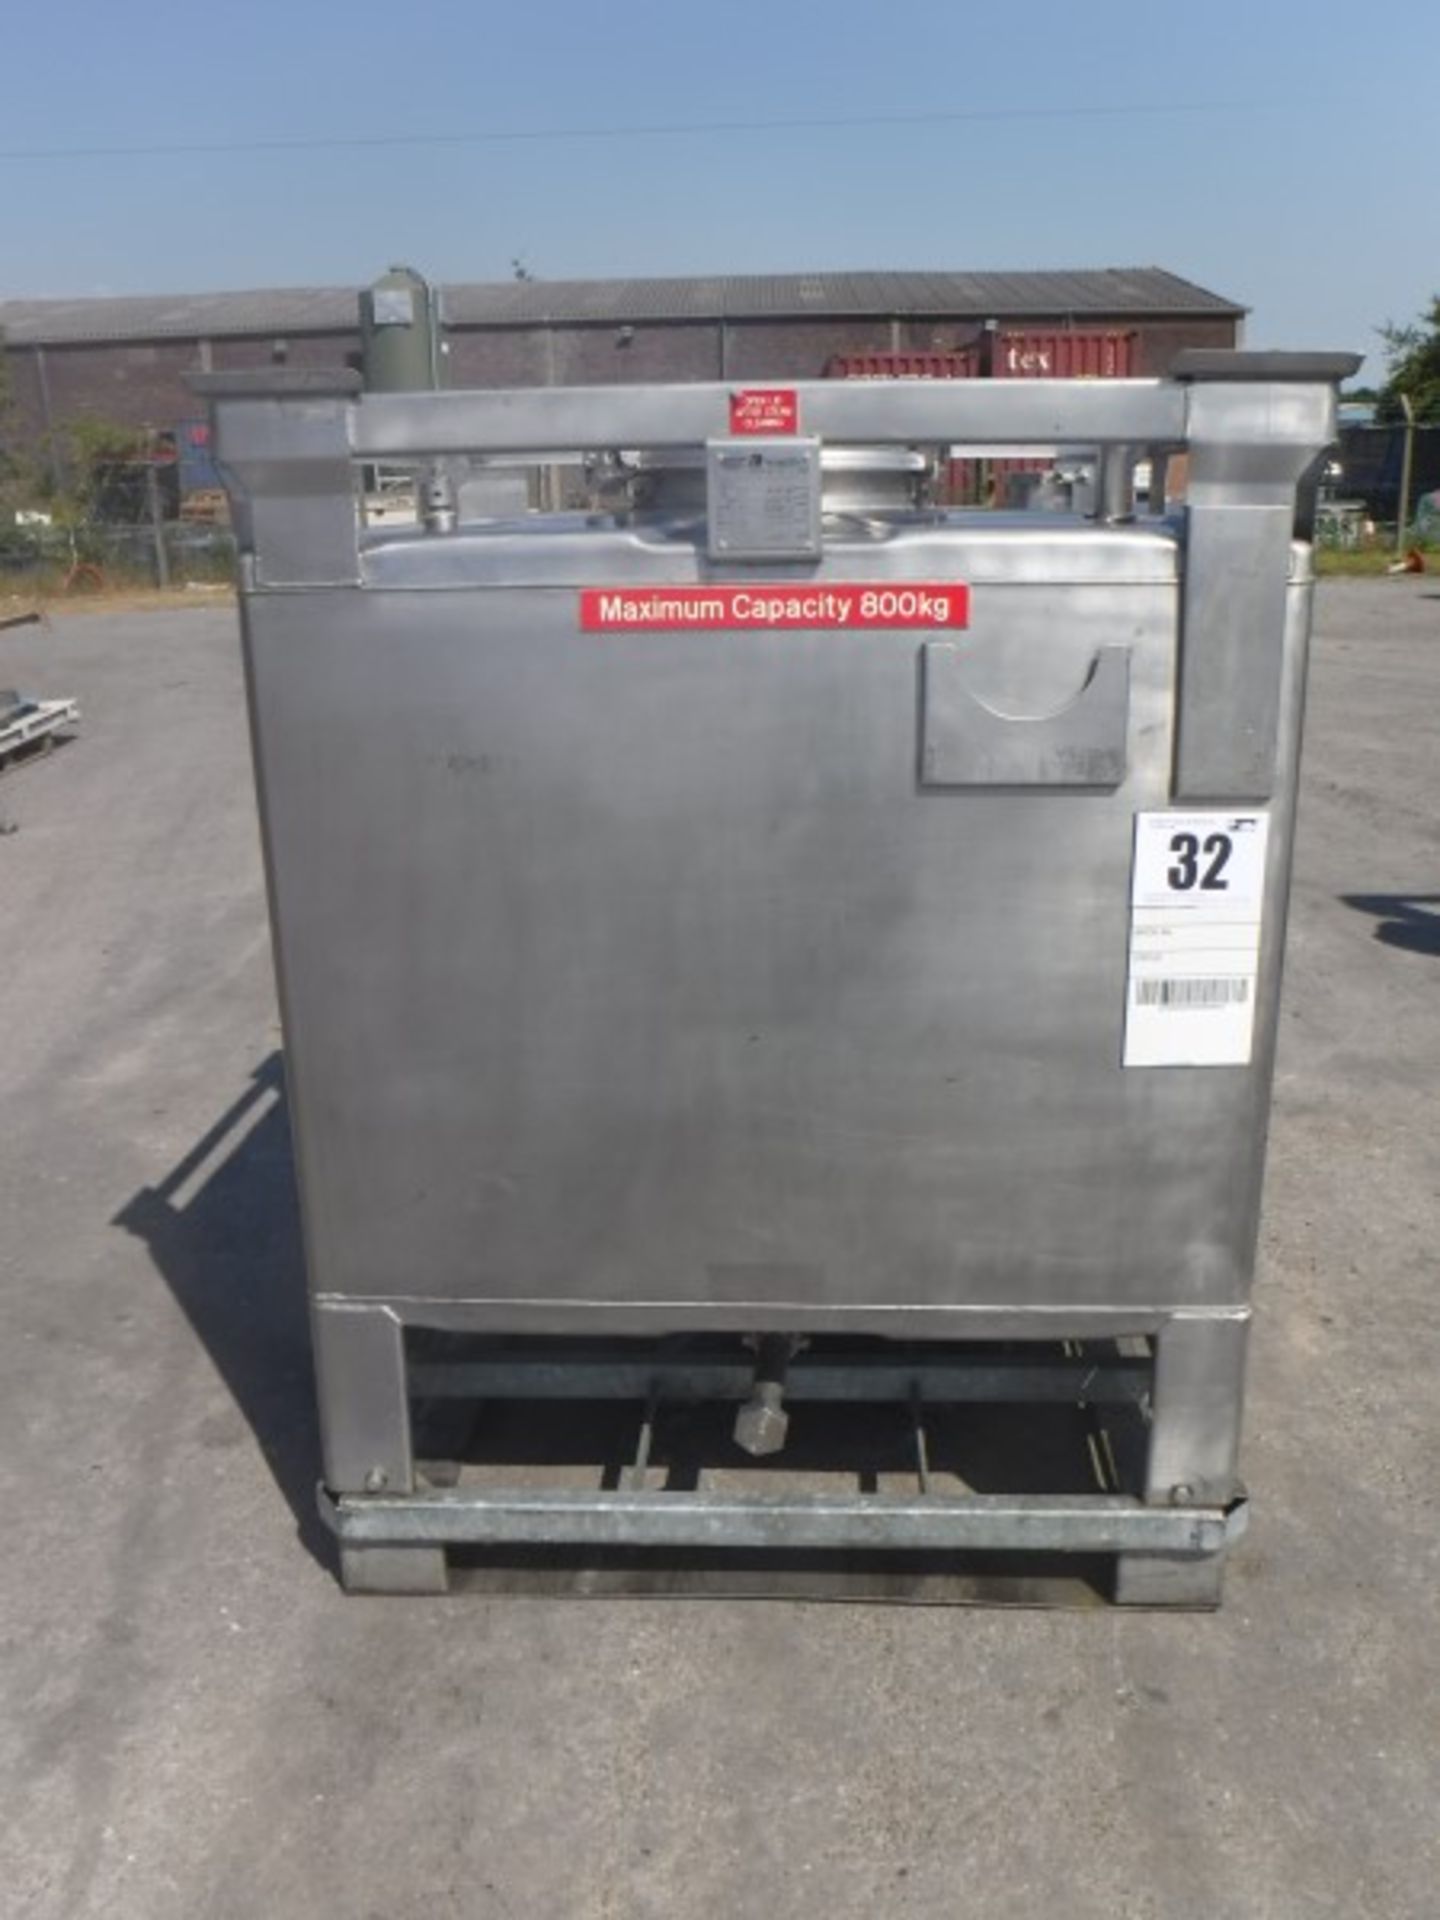 Stainless Steel IBC, 950 litres, Inspection Cover, 2 Filling Points and Pressure release Valve. 1